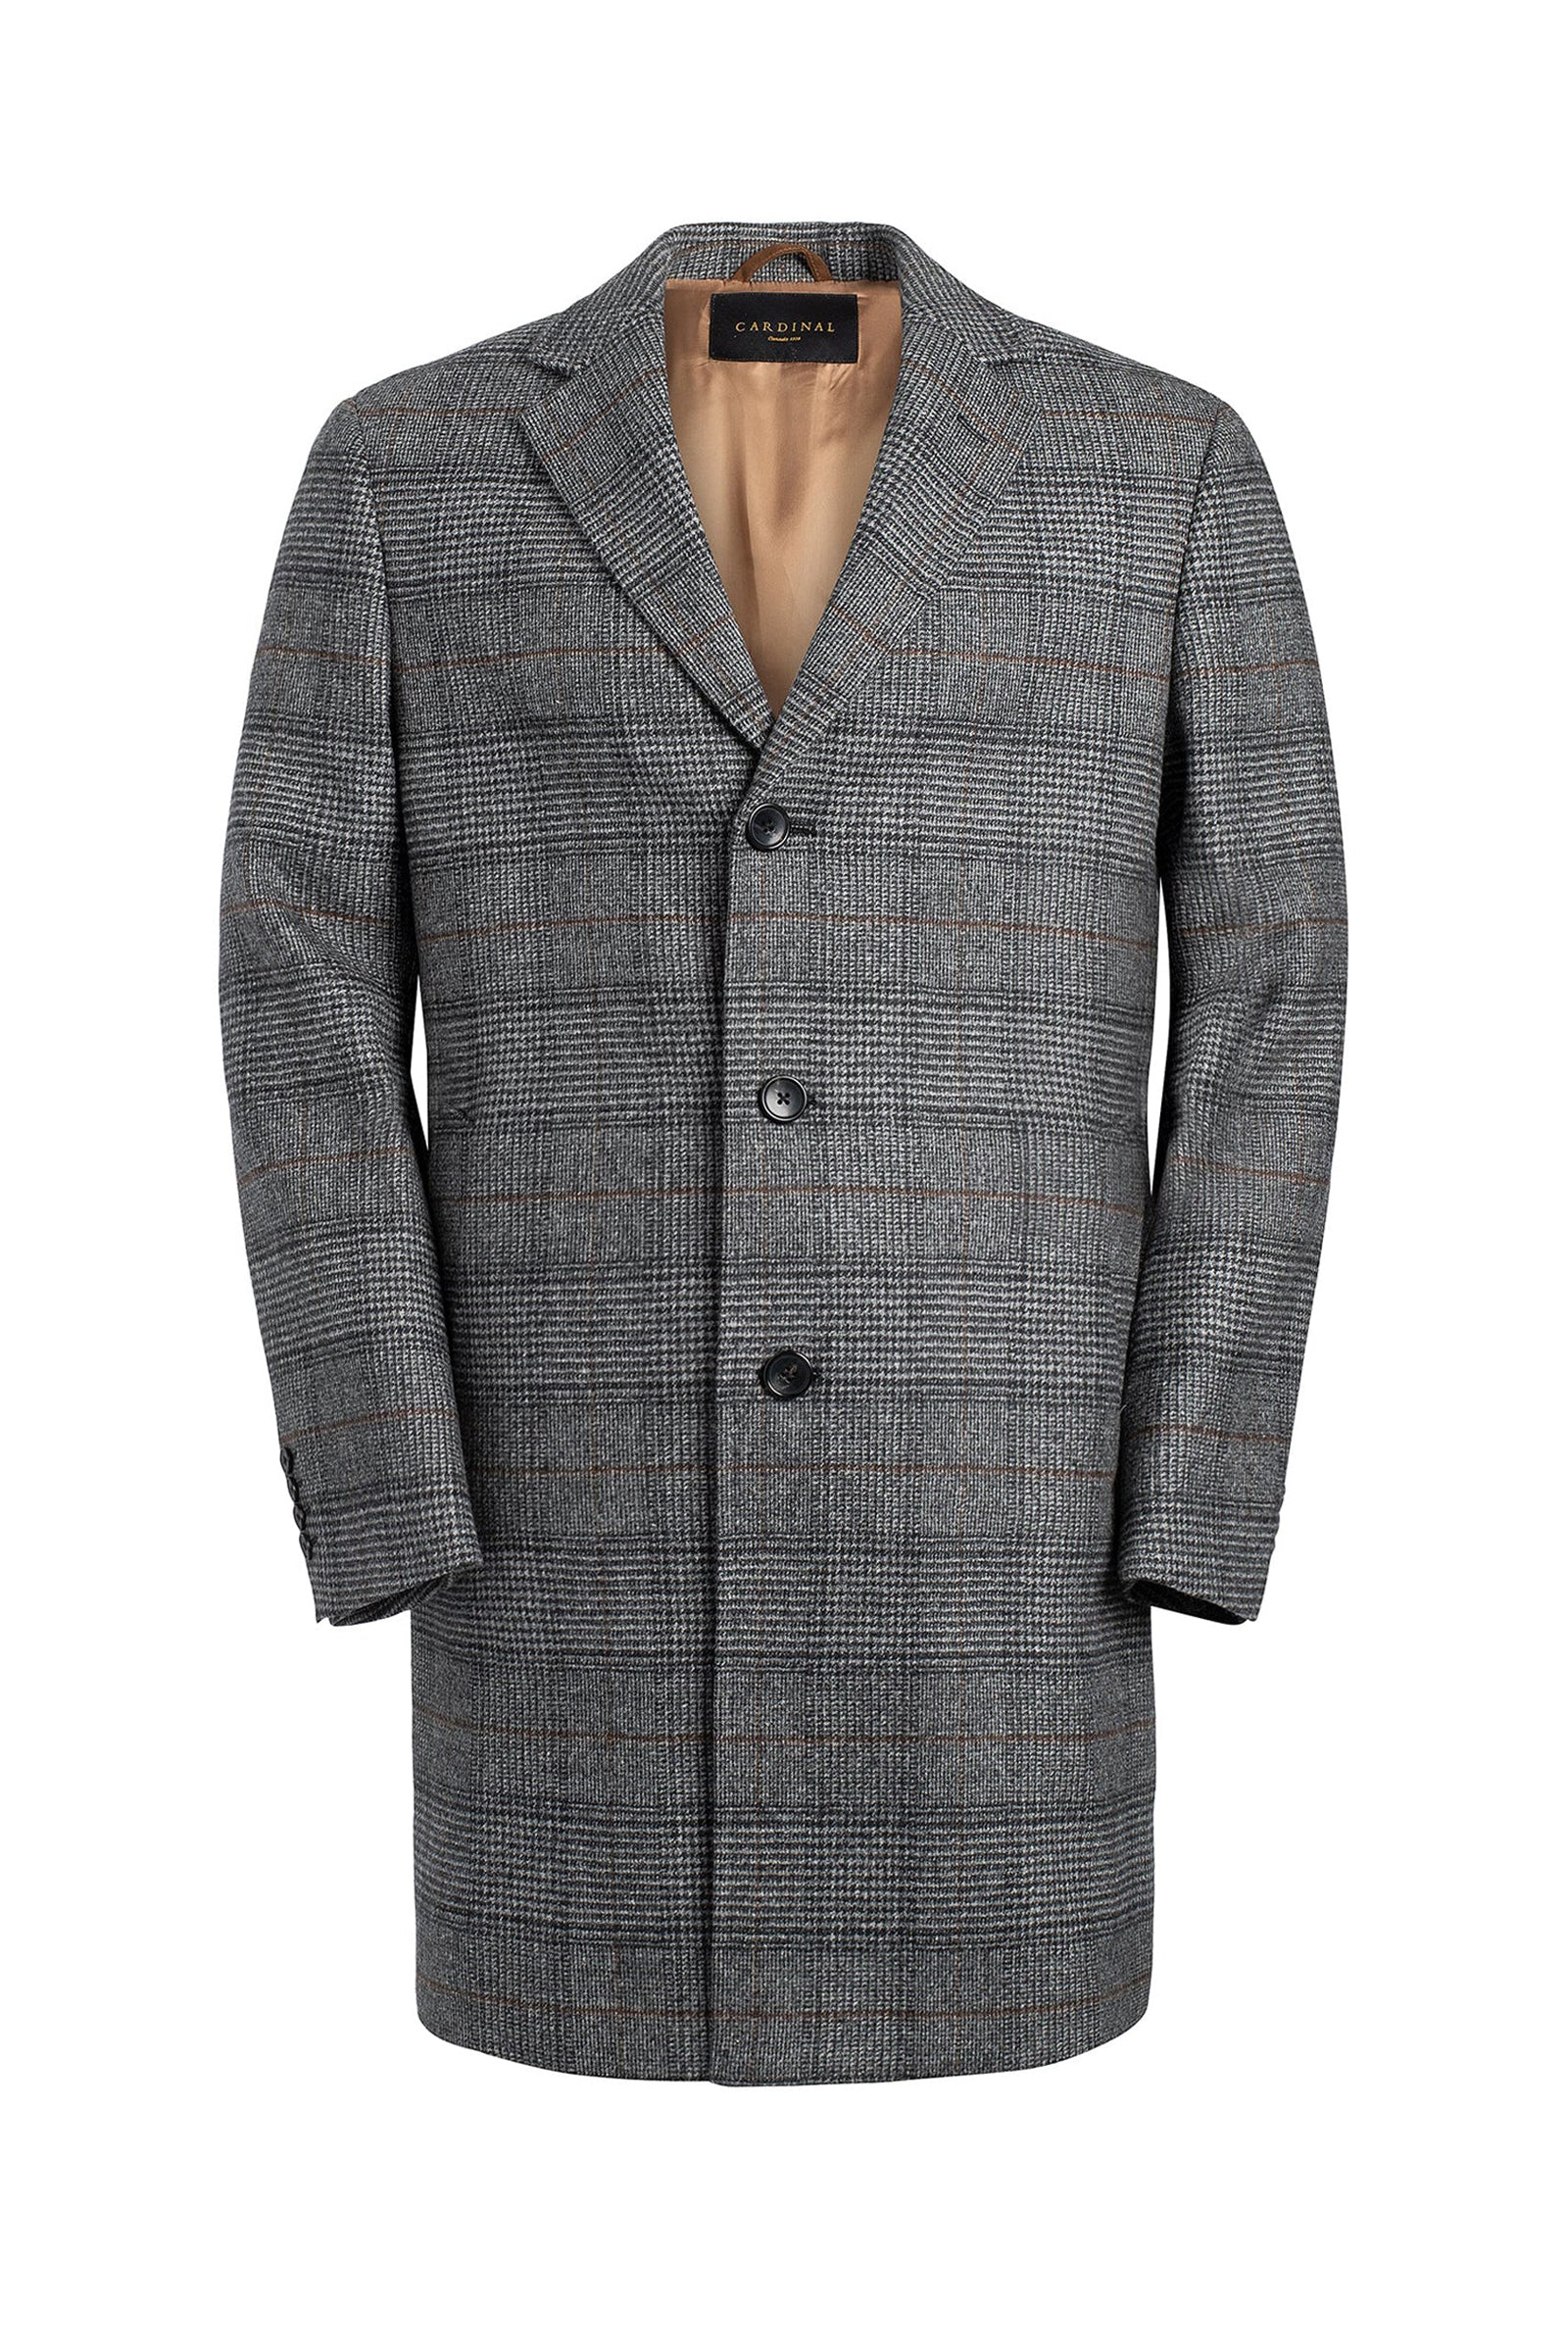 Stedwell top coat charcoal plaid wool 38 inch length